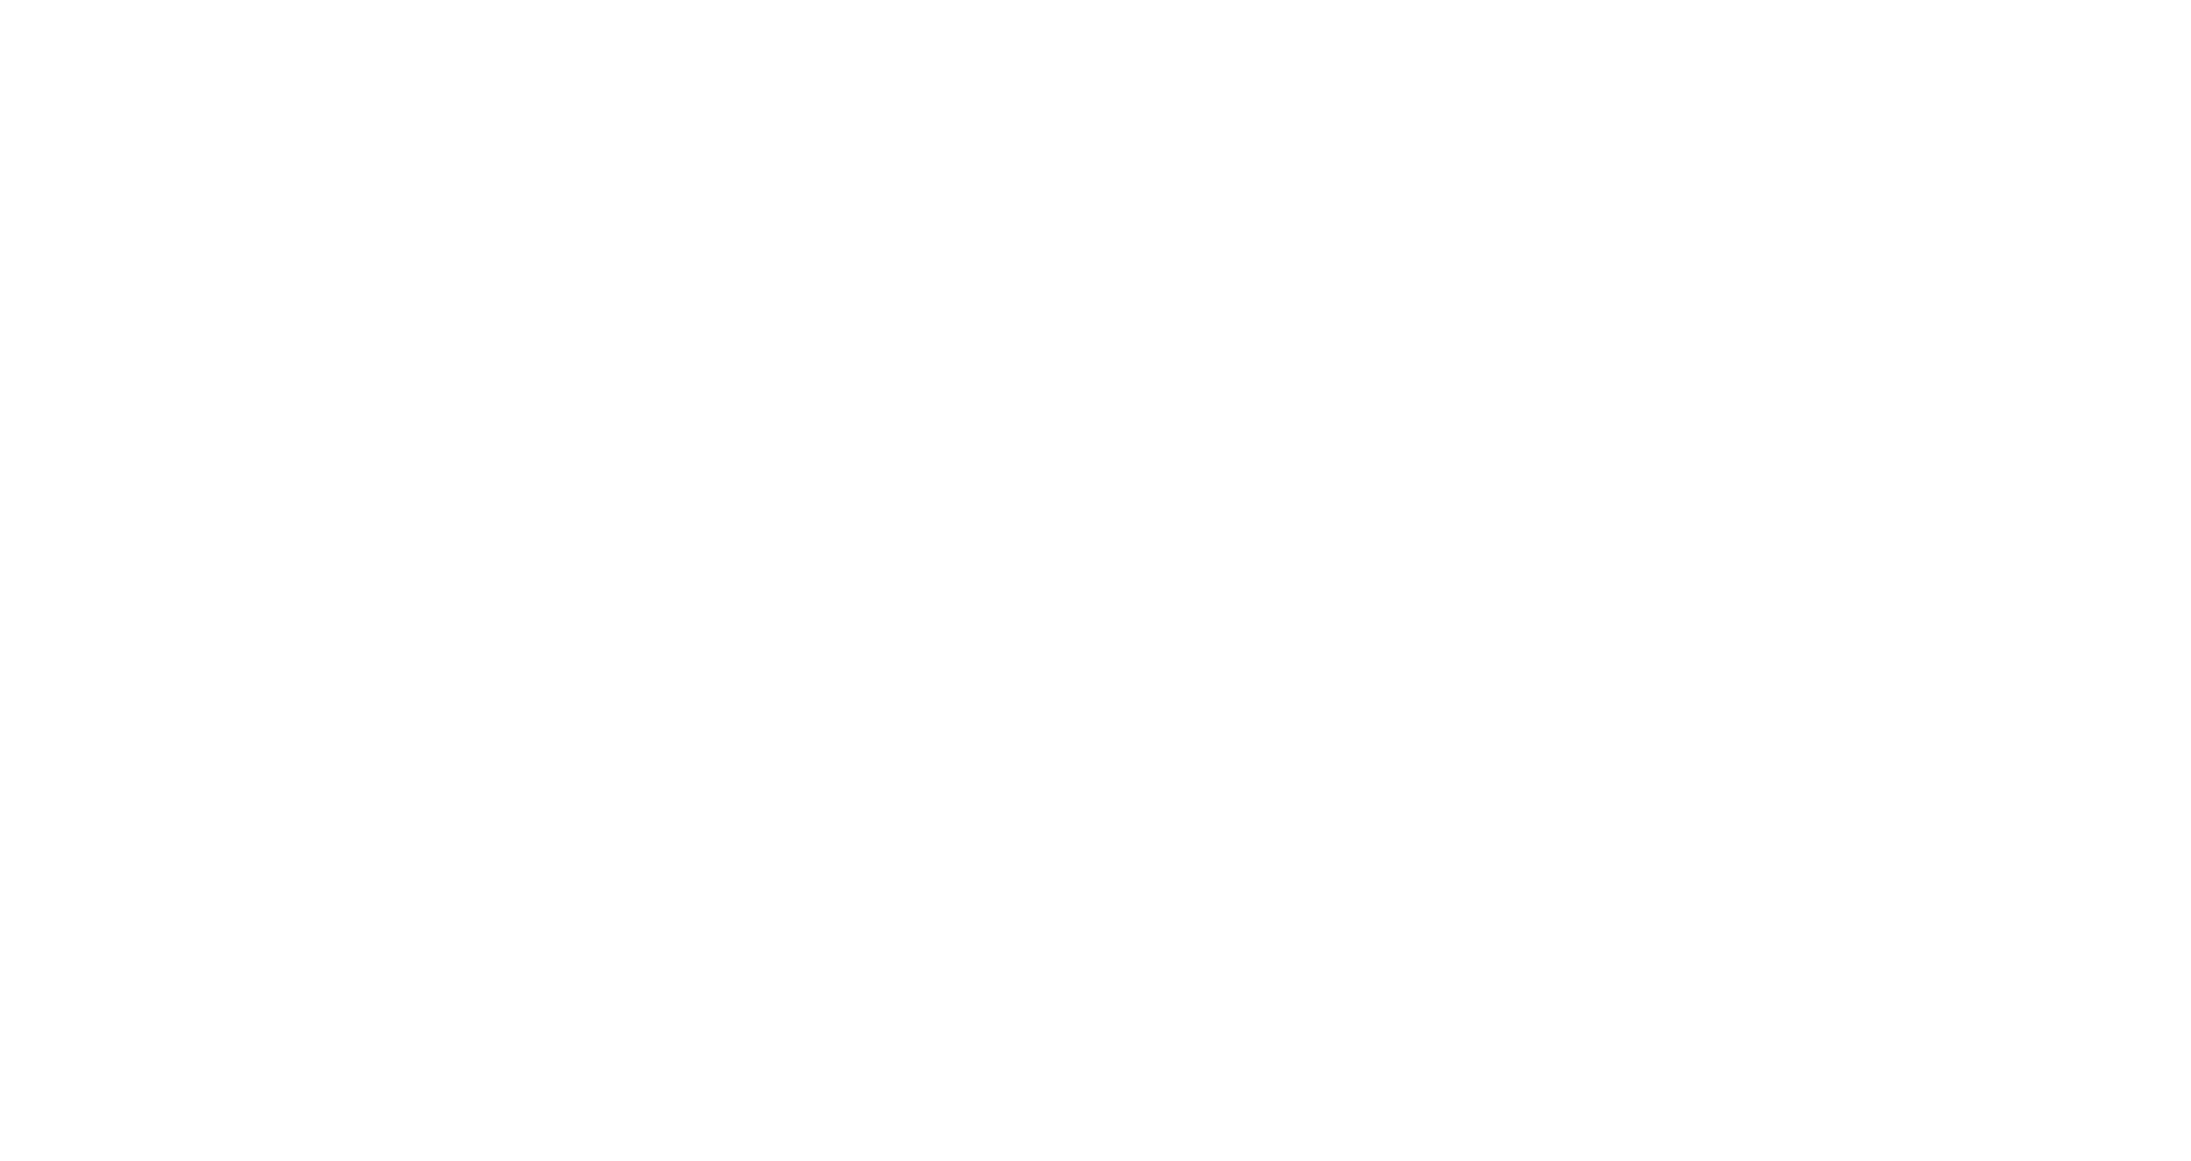 Download Pepsi Logo Black And White Ps4 Logo White Transparent Png Image With No Background Pngkey Com